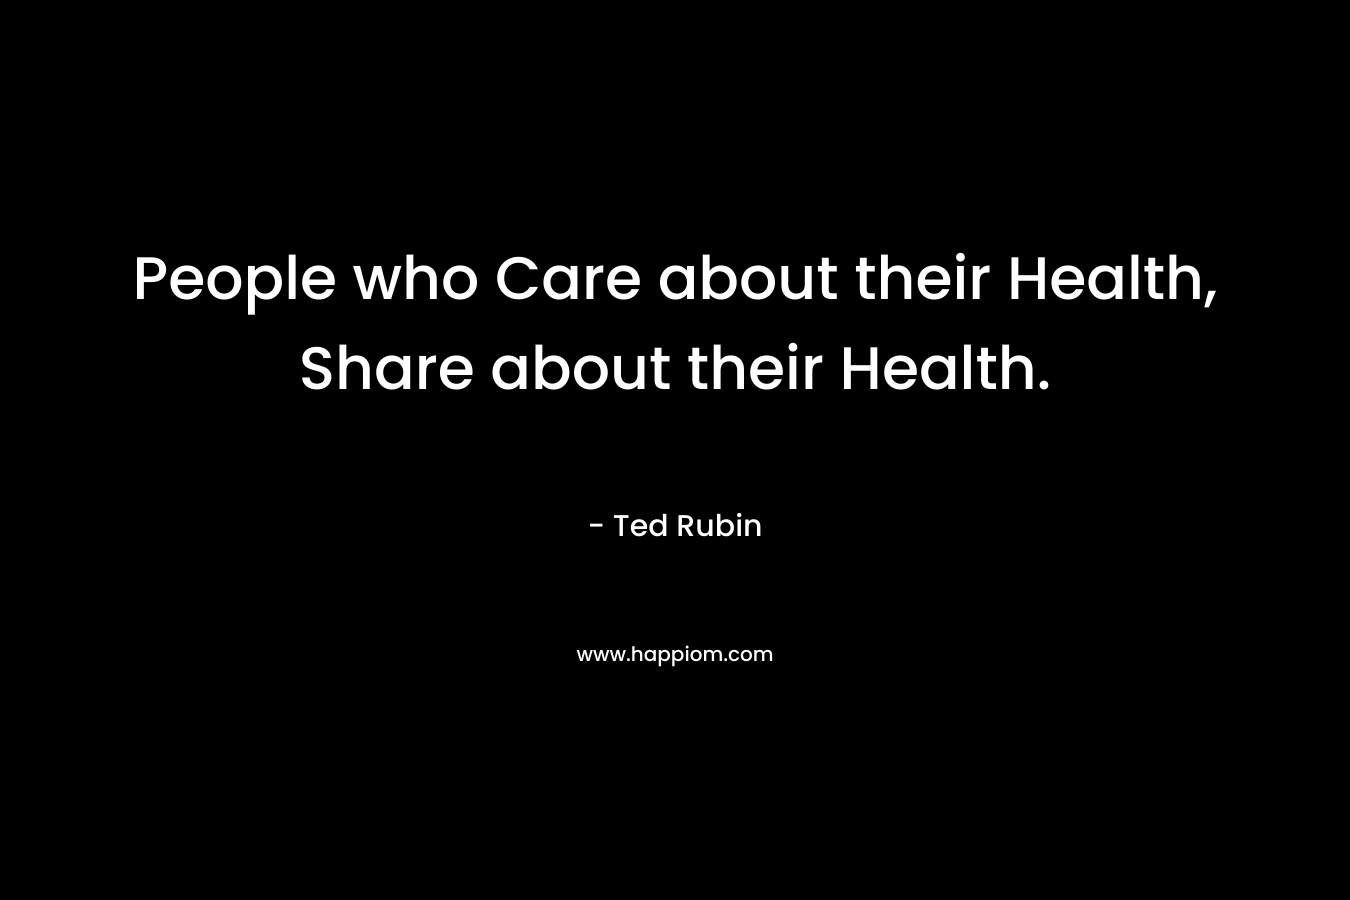 People who Care about their Health, Share about their Health.